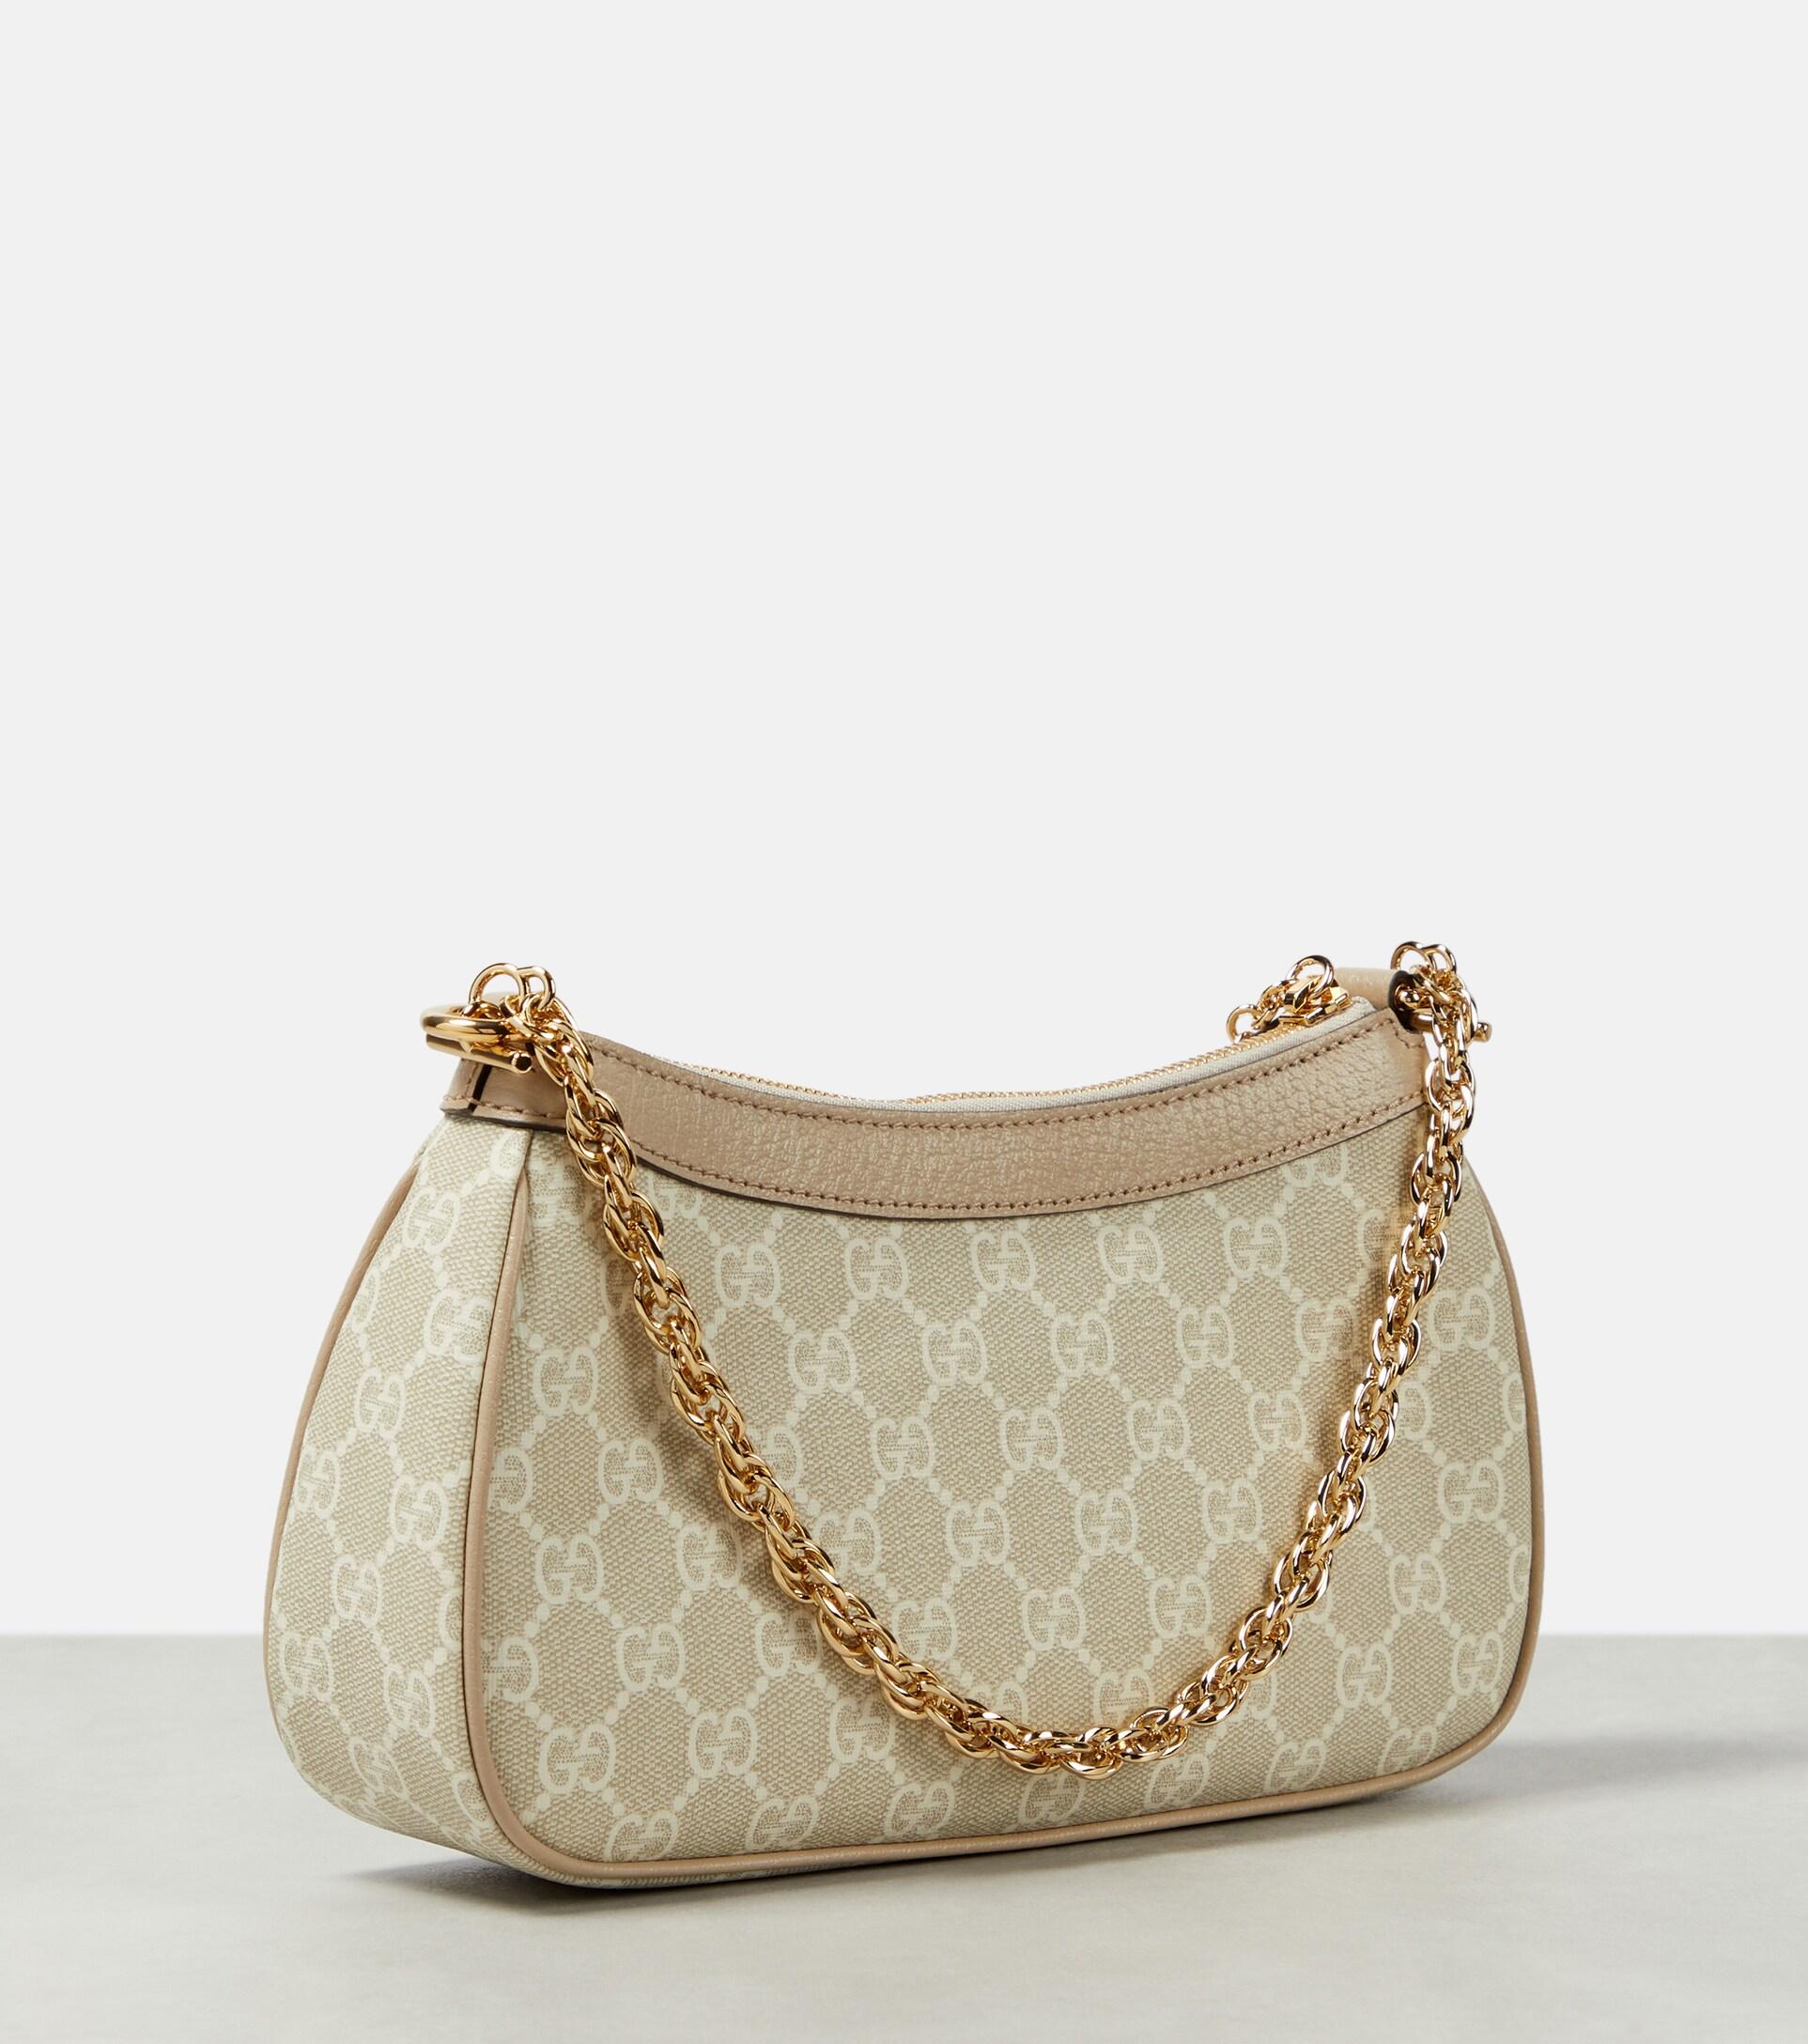 Ophidia GG small shoulder bag in beige and white canvas